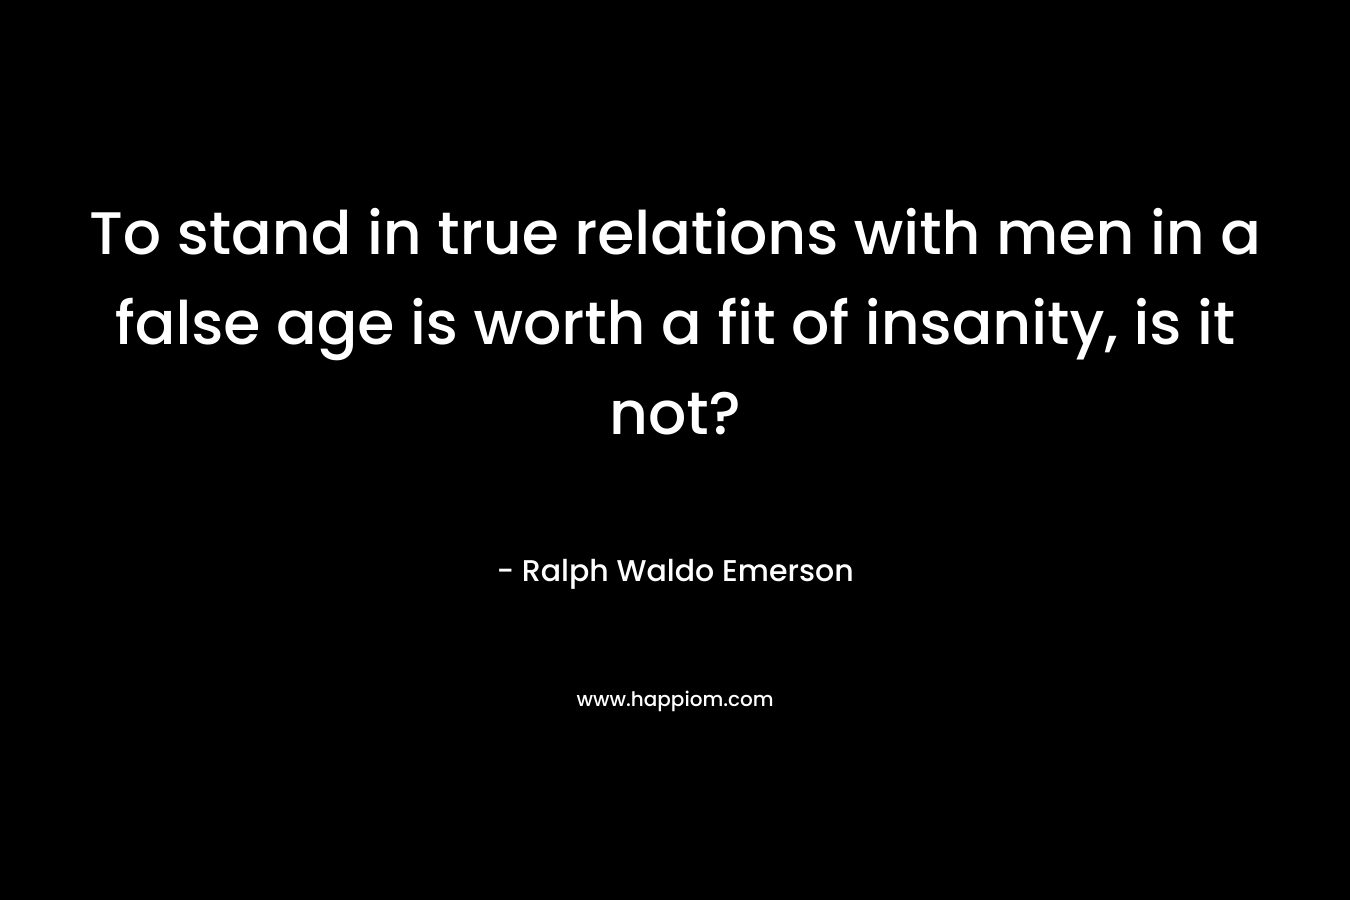 To stand in true relations with men in a false age is worth a fit of insanity, is it not?